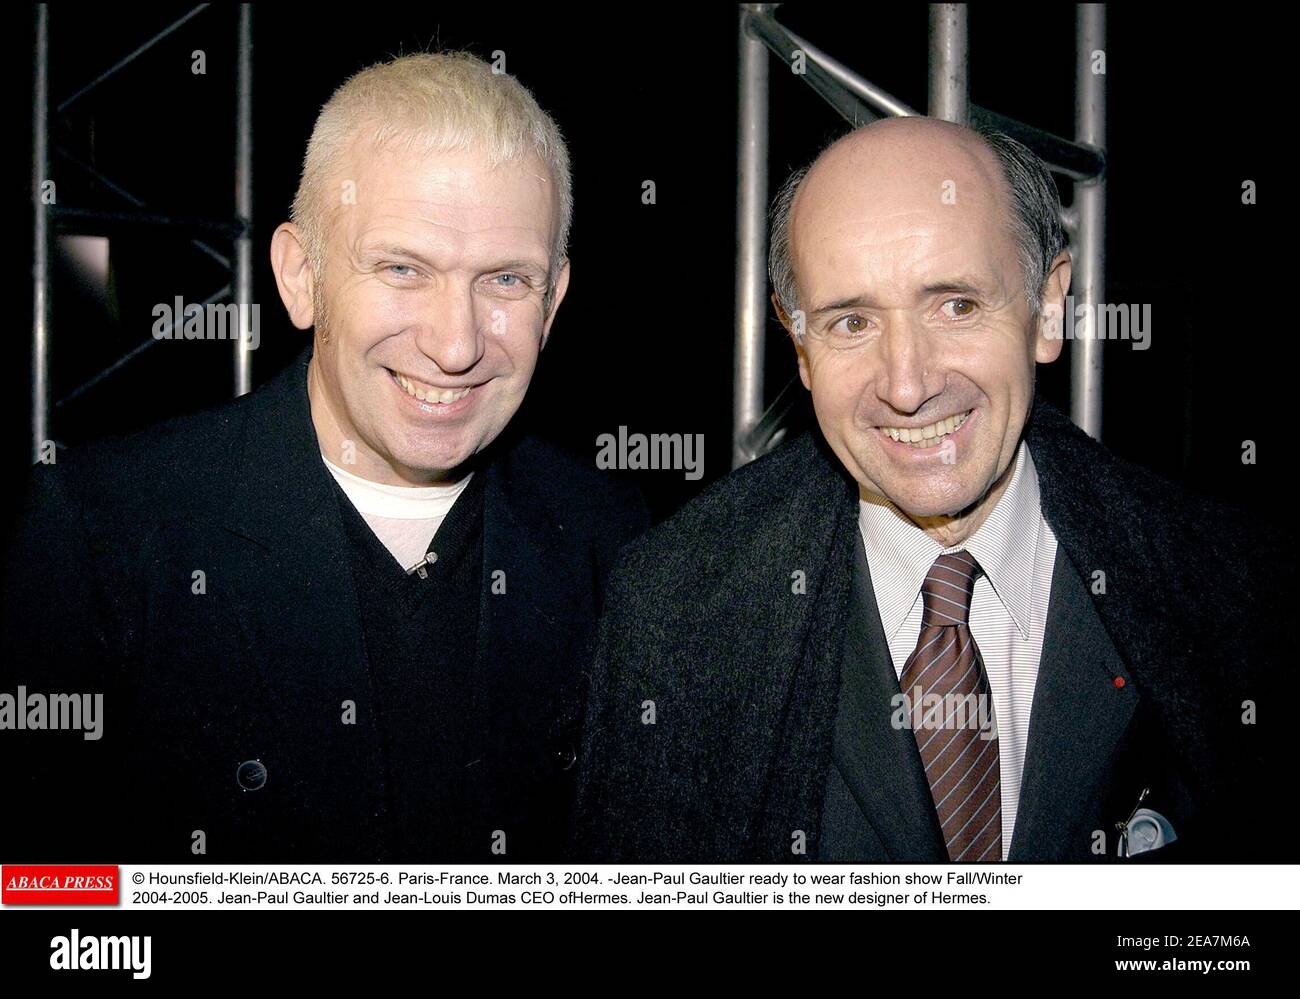 © Hounsfield-Klein/ABACA. 56725-6. Paris-France. March 3, 2004. Jean-Paul Gaultier Ready to wear fashion show Fall/Winter 2004-2005. Jean-Paul Gaultier and Jean-Louis Dumas CEO of Hermes. Jean-Paul Gaultier is the new designer of Hermes. Stock Photo